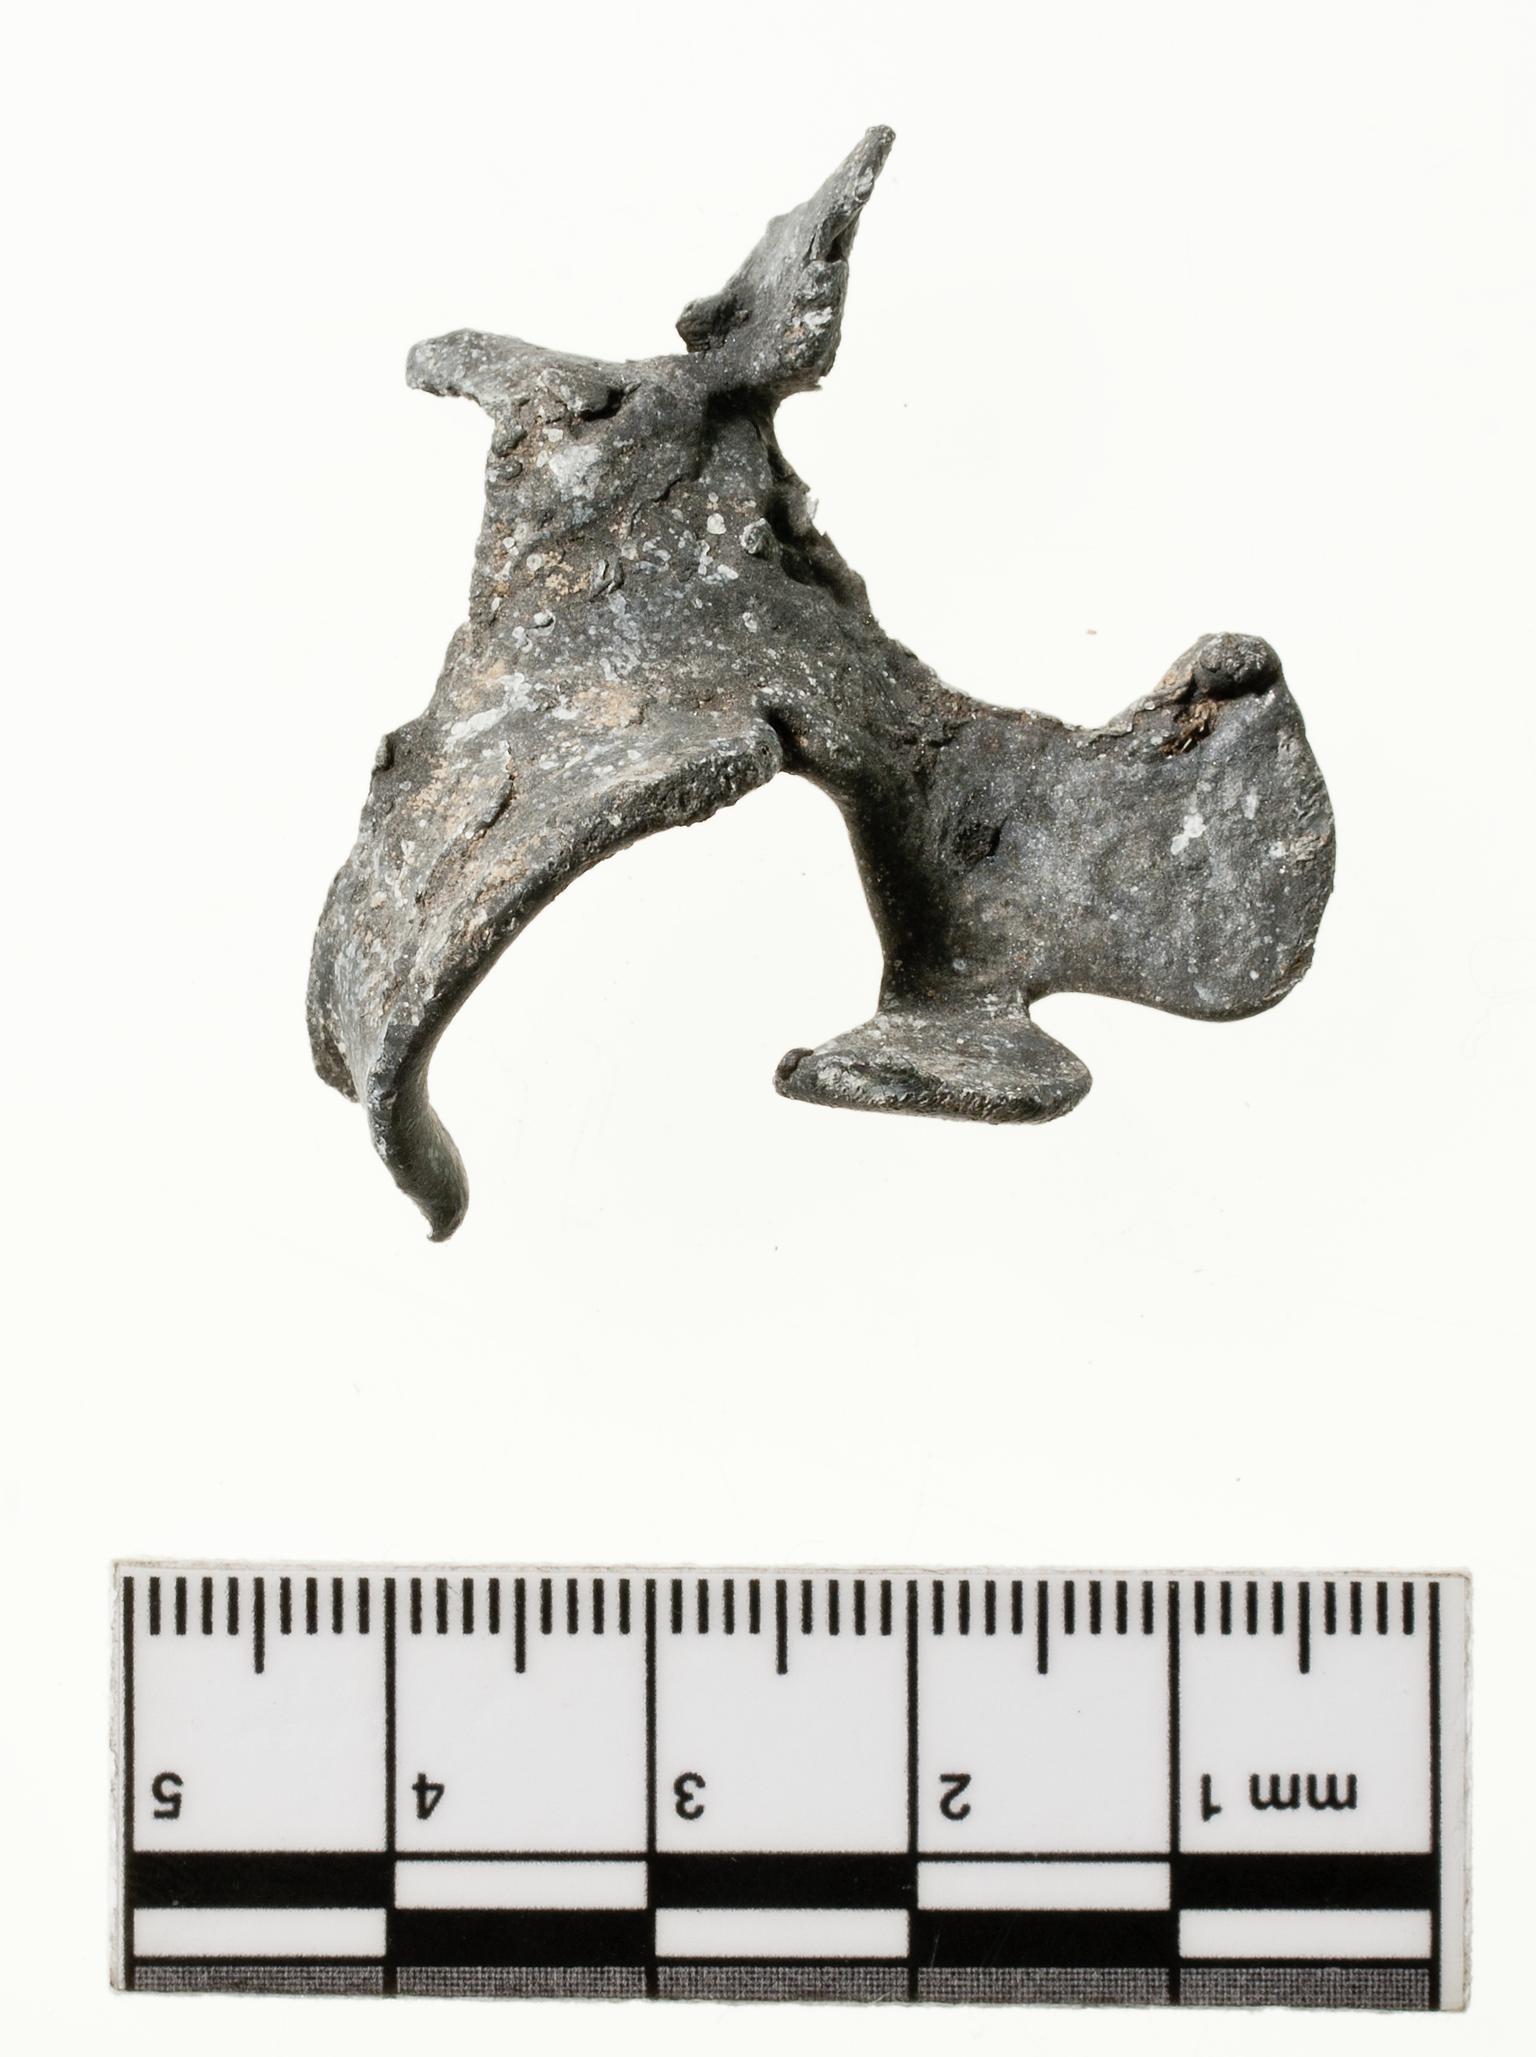 Medieval / Post-Medieval lead objects